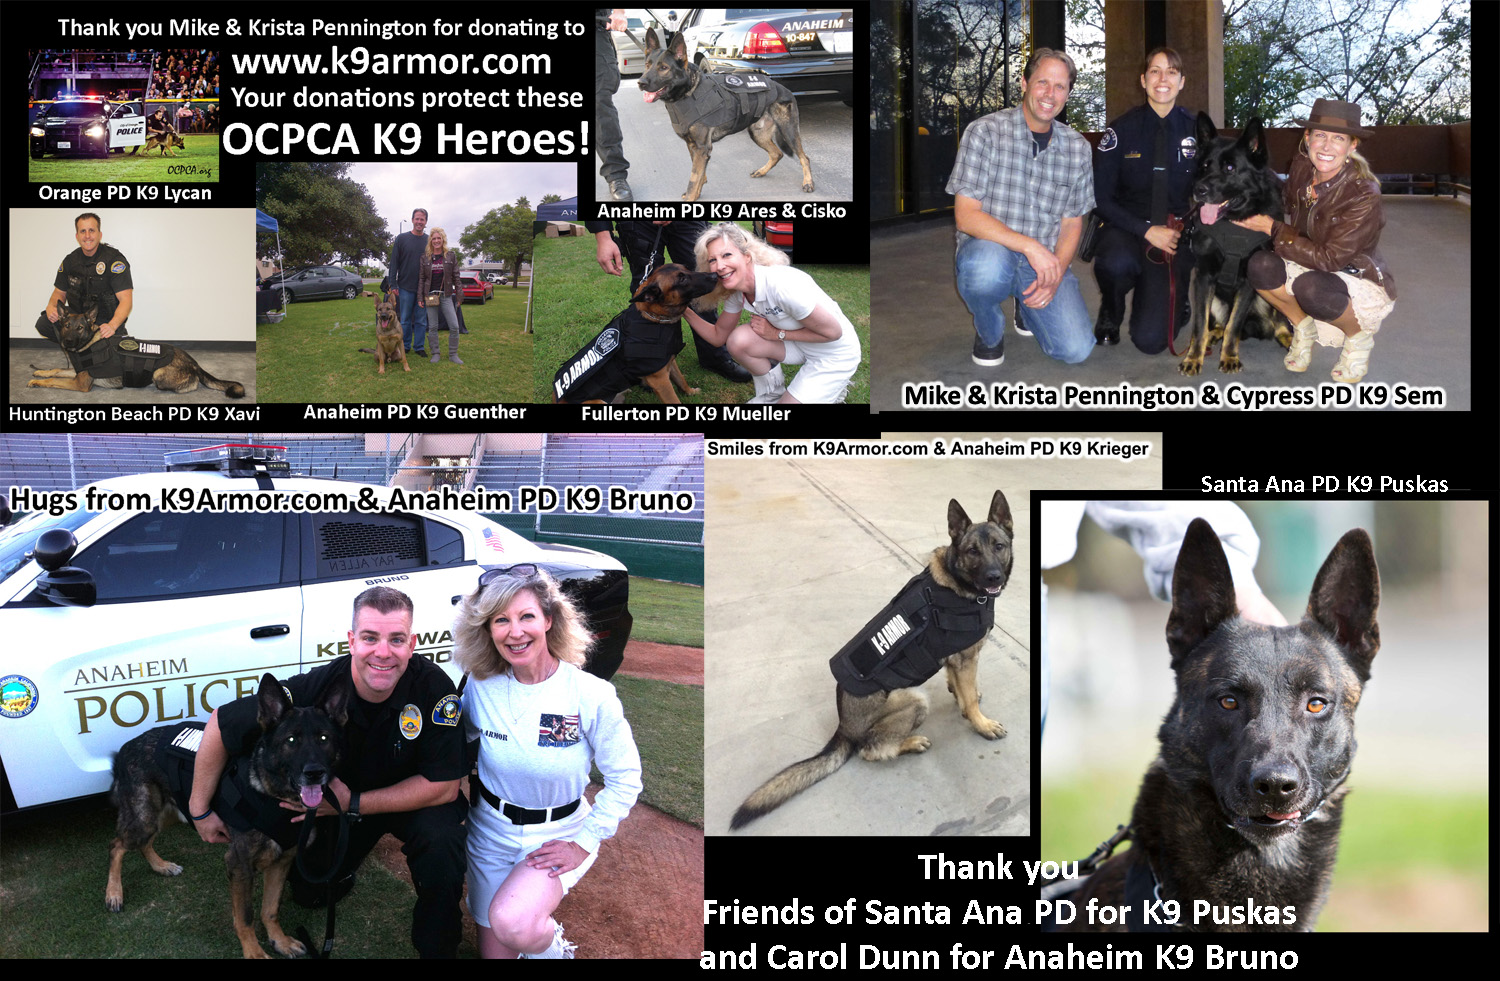 2014 our Angels the Penningtons donated for three bulletproof vests bringing the total to 13 OCPCA K9 Heroes protected with K9 Armor